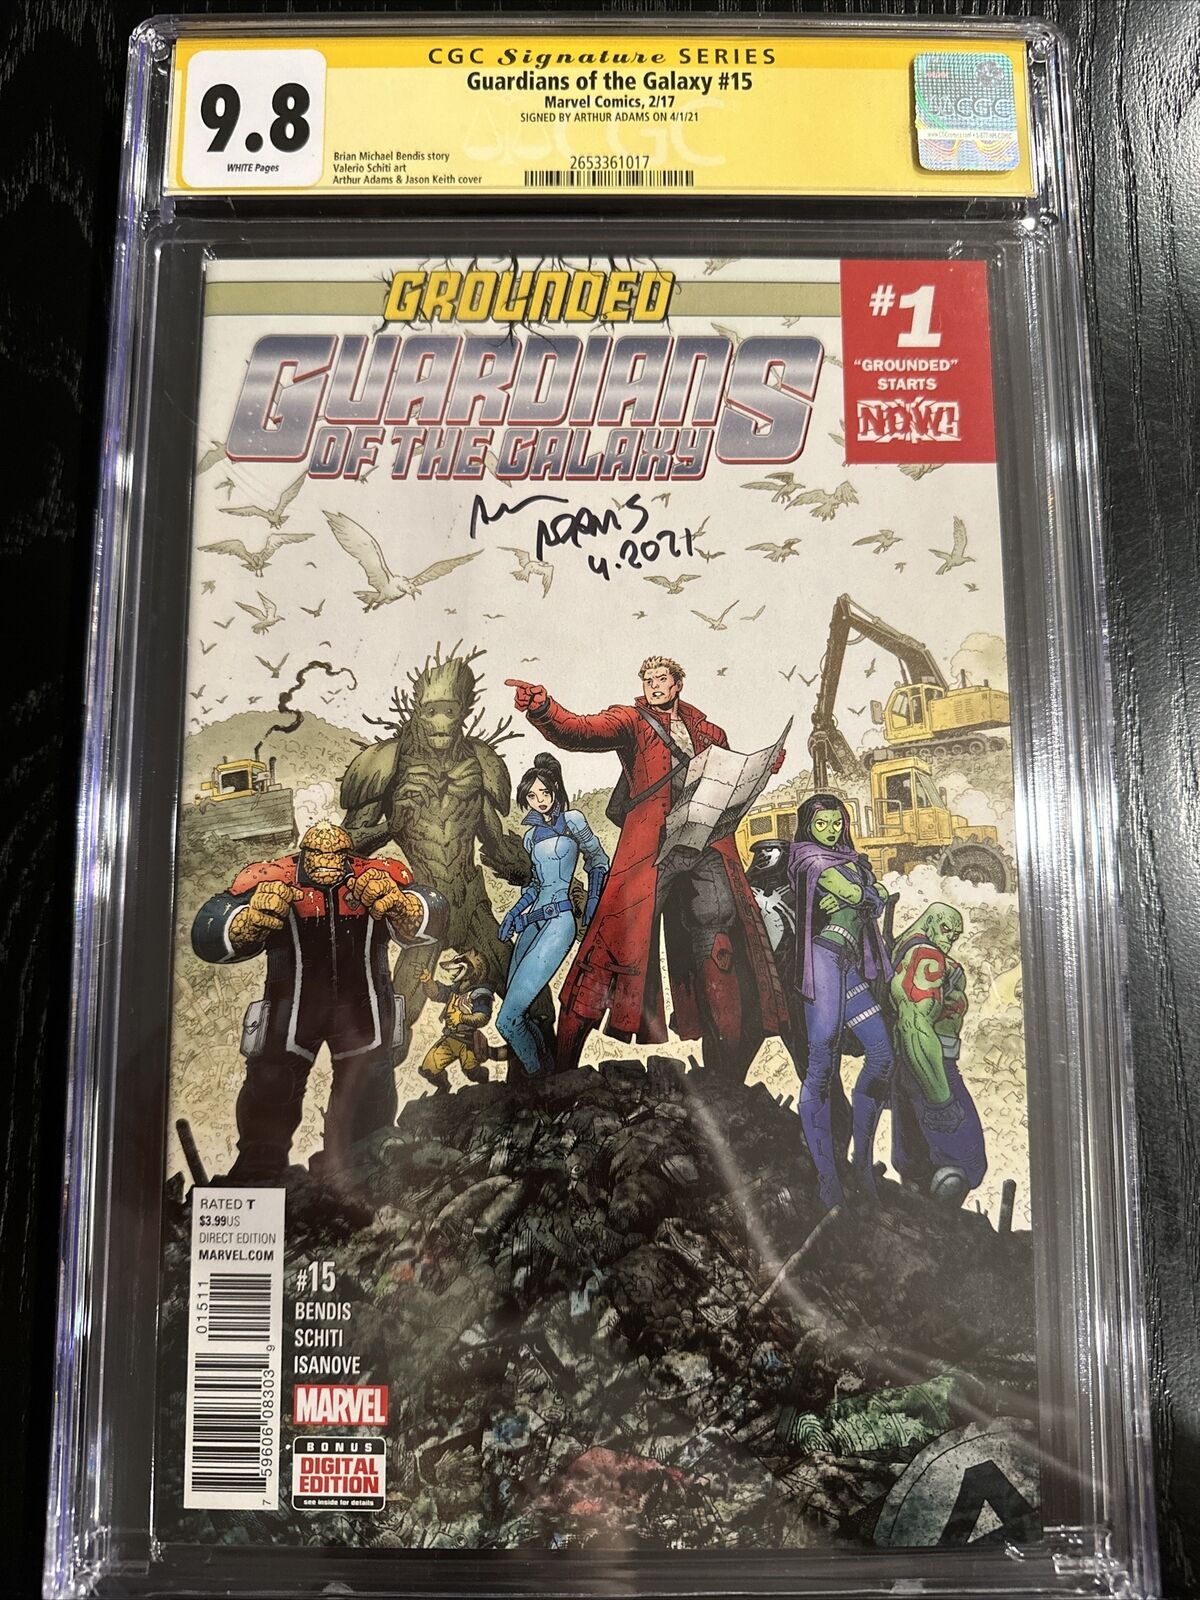 Guardians Of The Galaxy #15 Marvel (CGC Signature Series 9.8)~